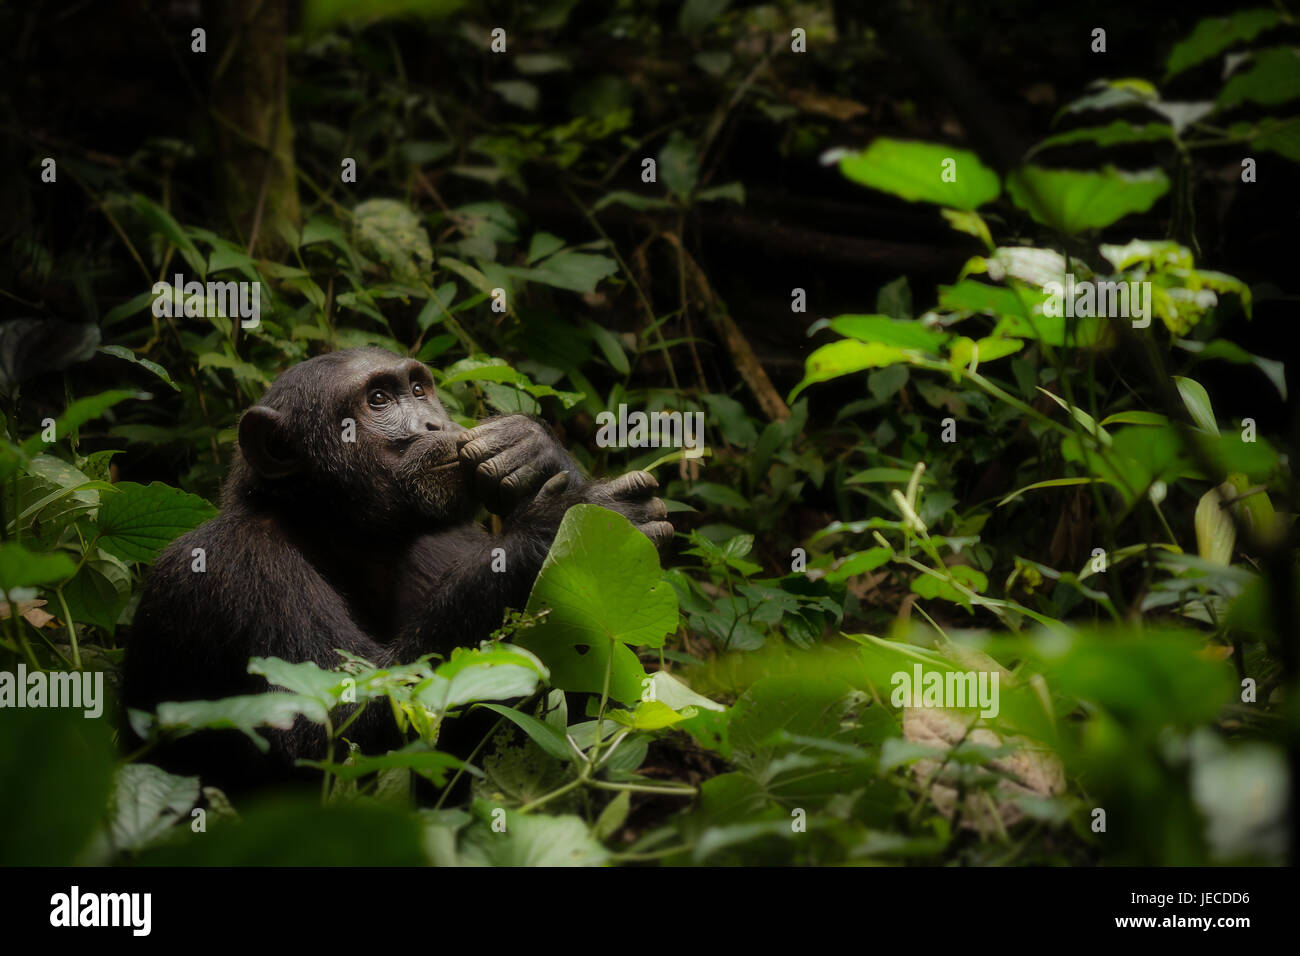 Wild common chimpanzee sitting alone in African forest with human-like expression on his face. Stock Photo